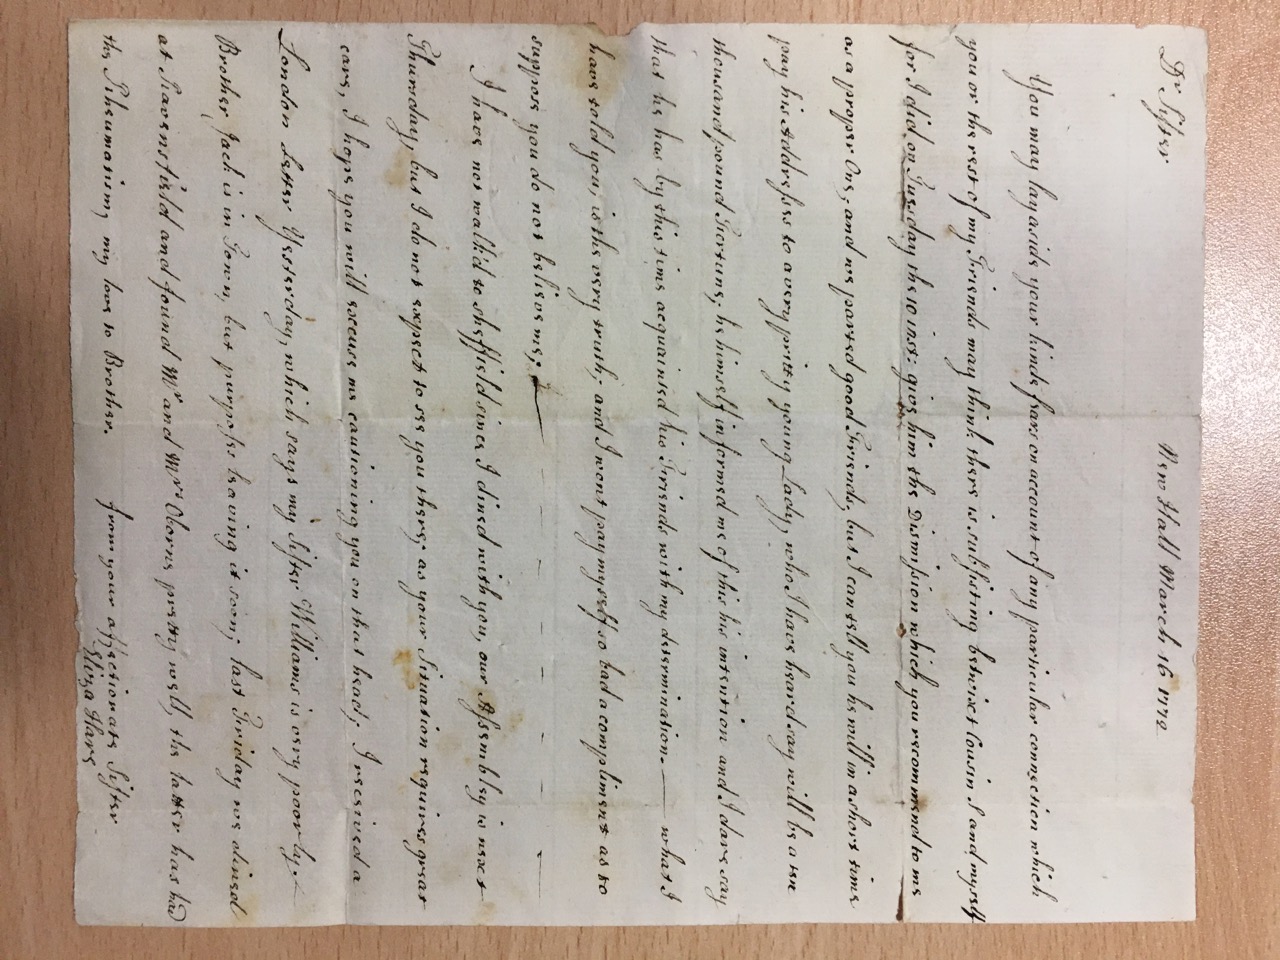 Image #1 of letter: Elizabeth Hare and Ann Hare, 16 March 1772